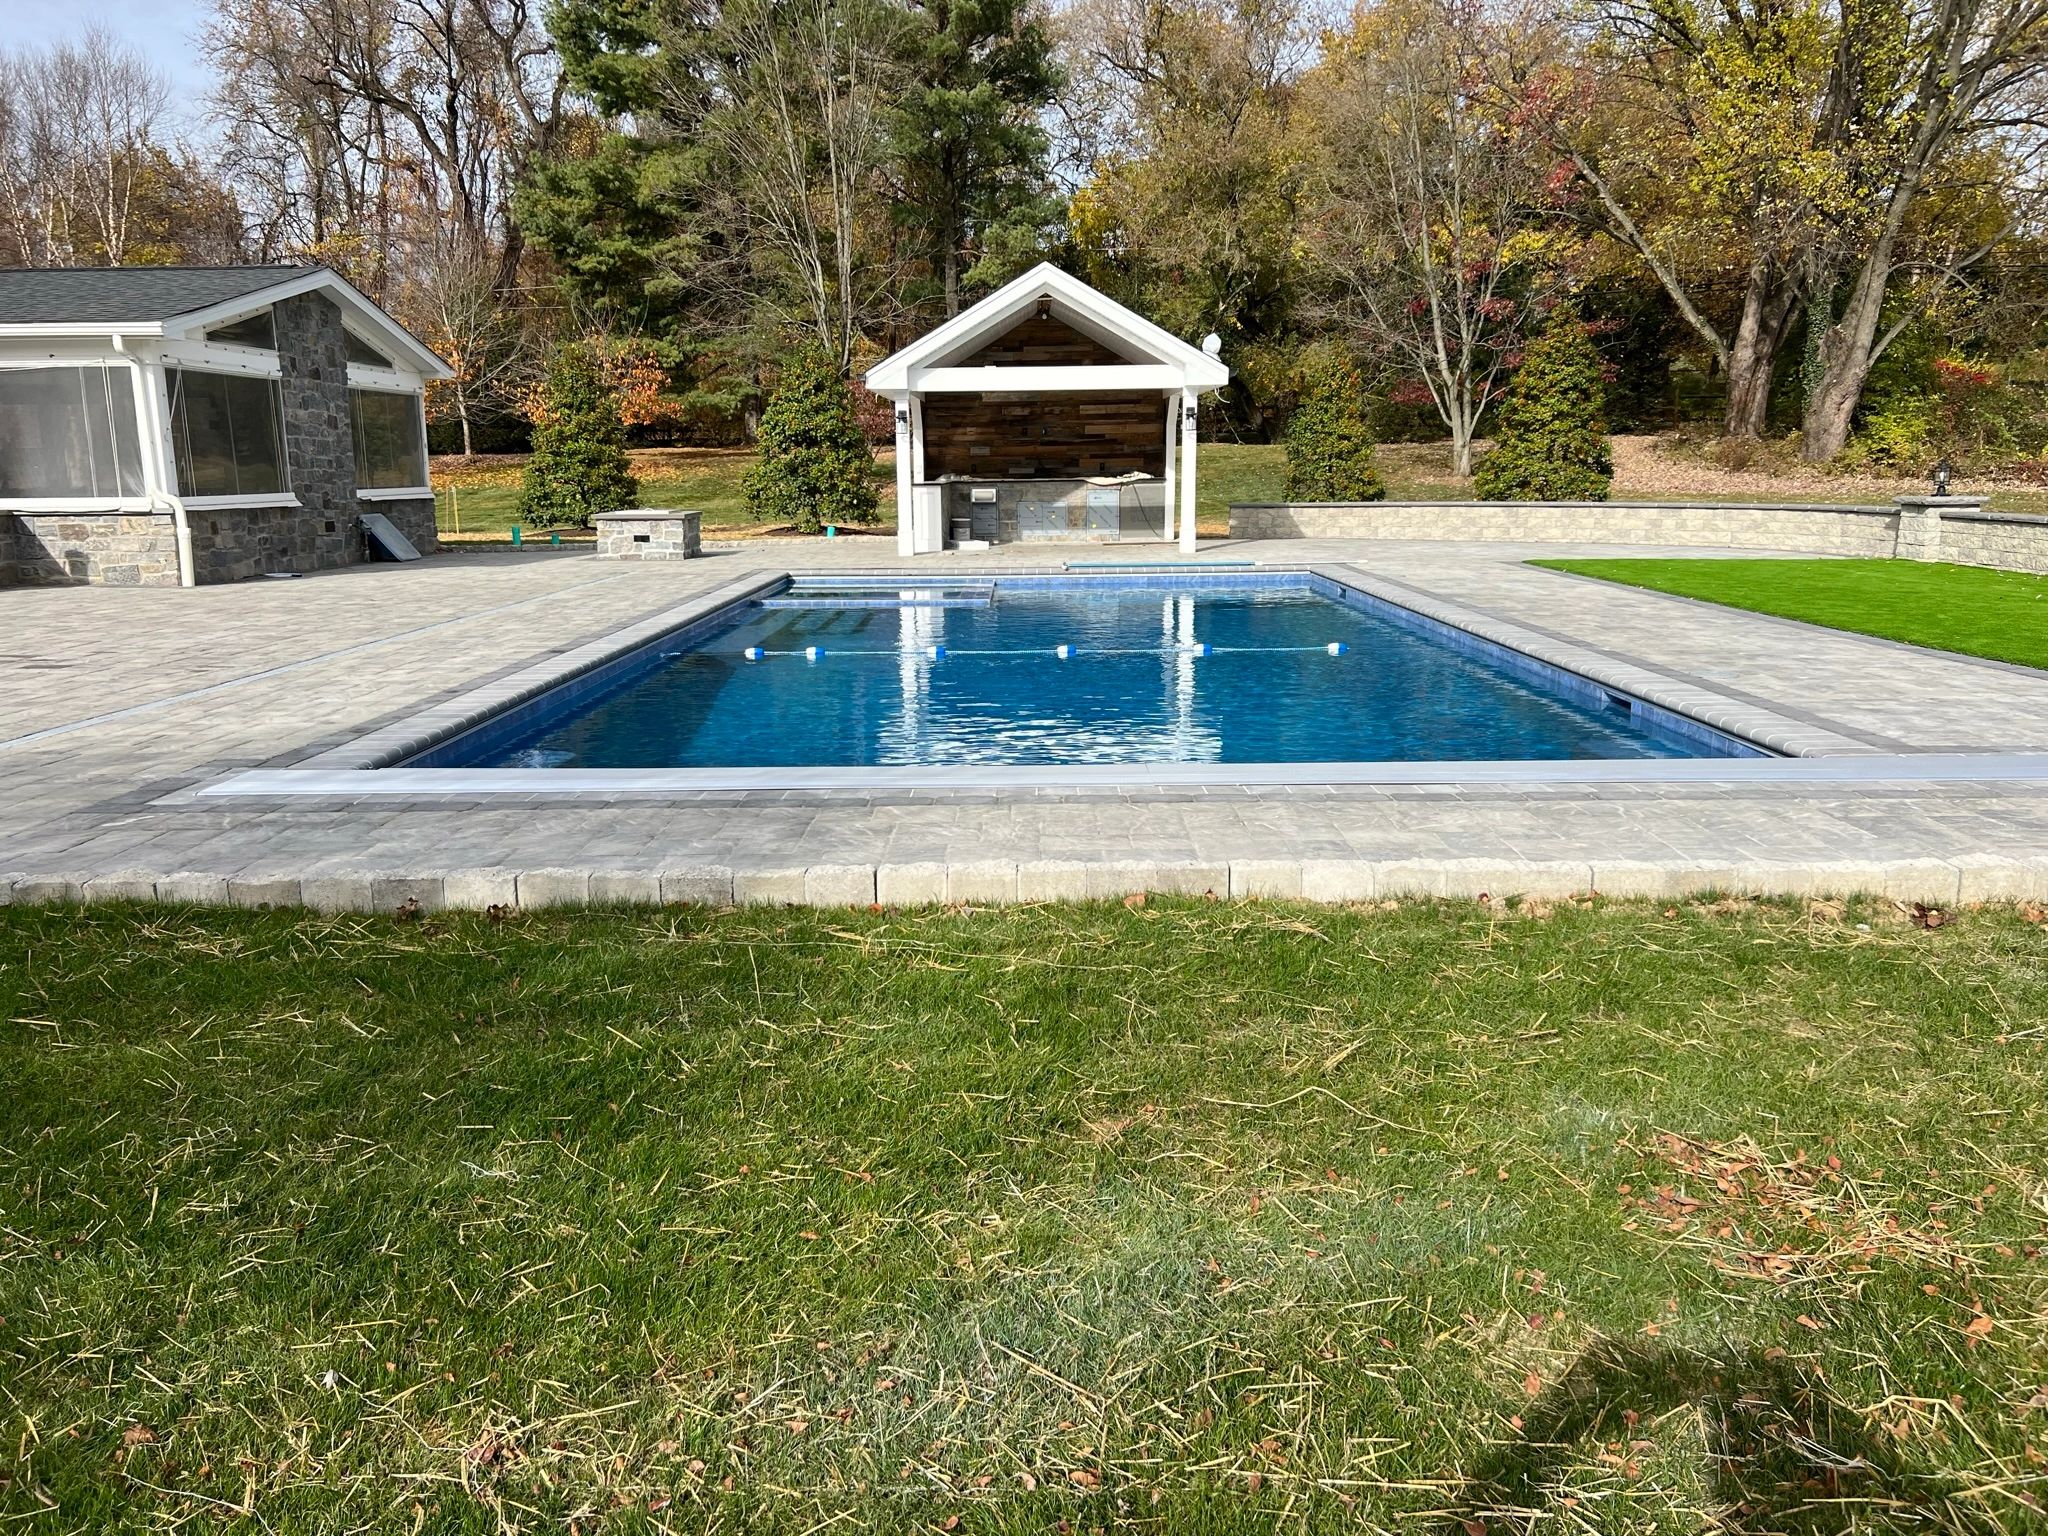 Pool hardscaping with pavers